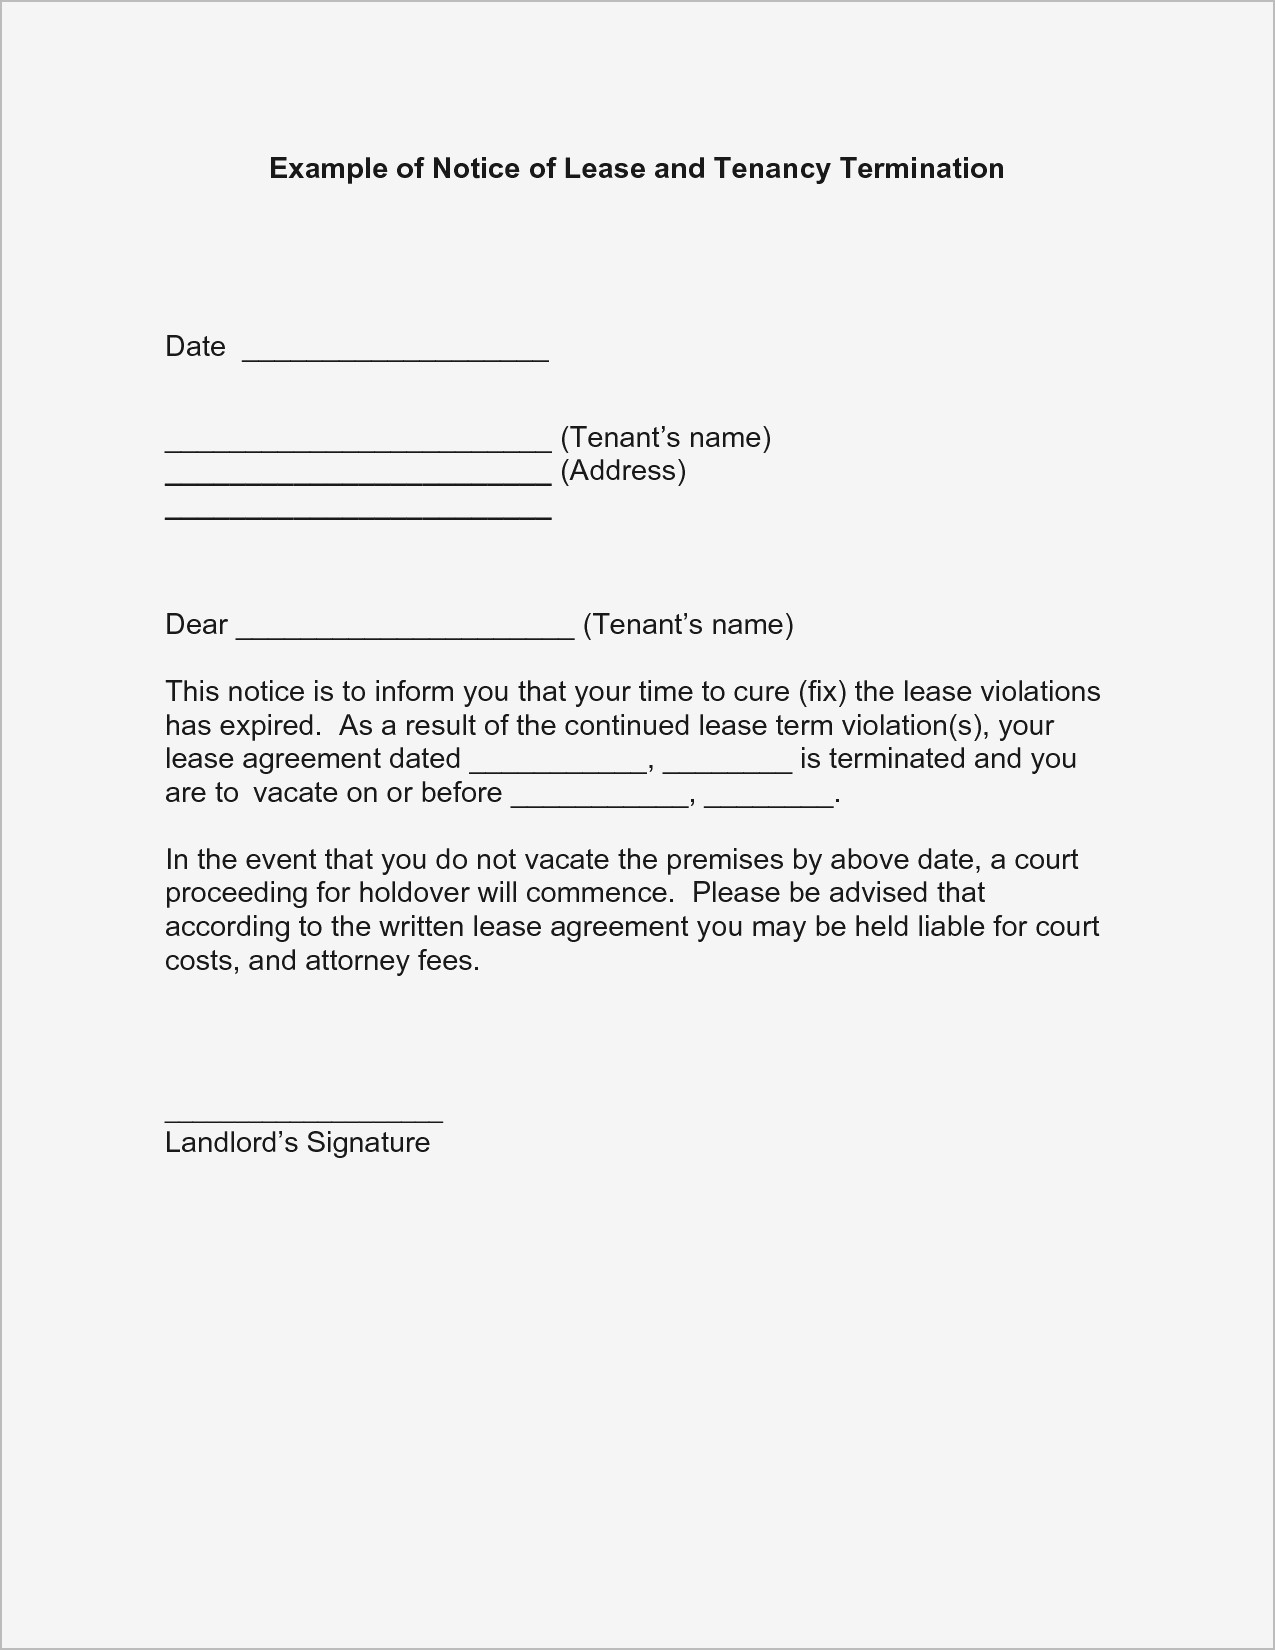 Unauthorized Tenant Letter Template - Landlord End Tenancy Letter Template